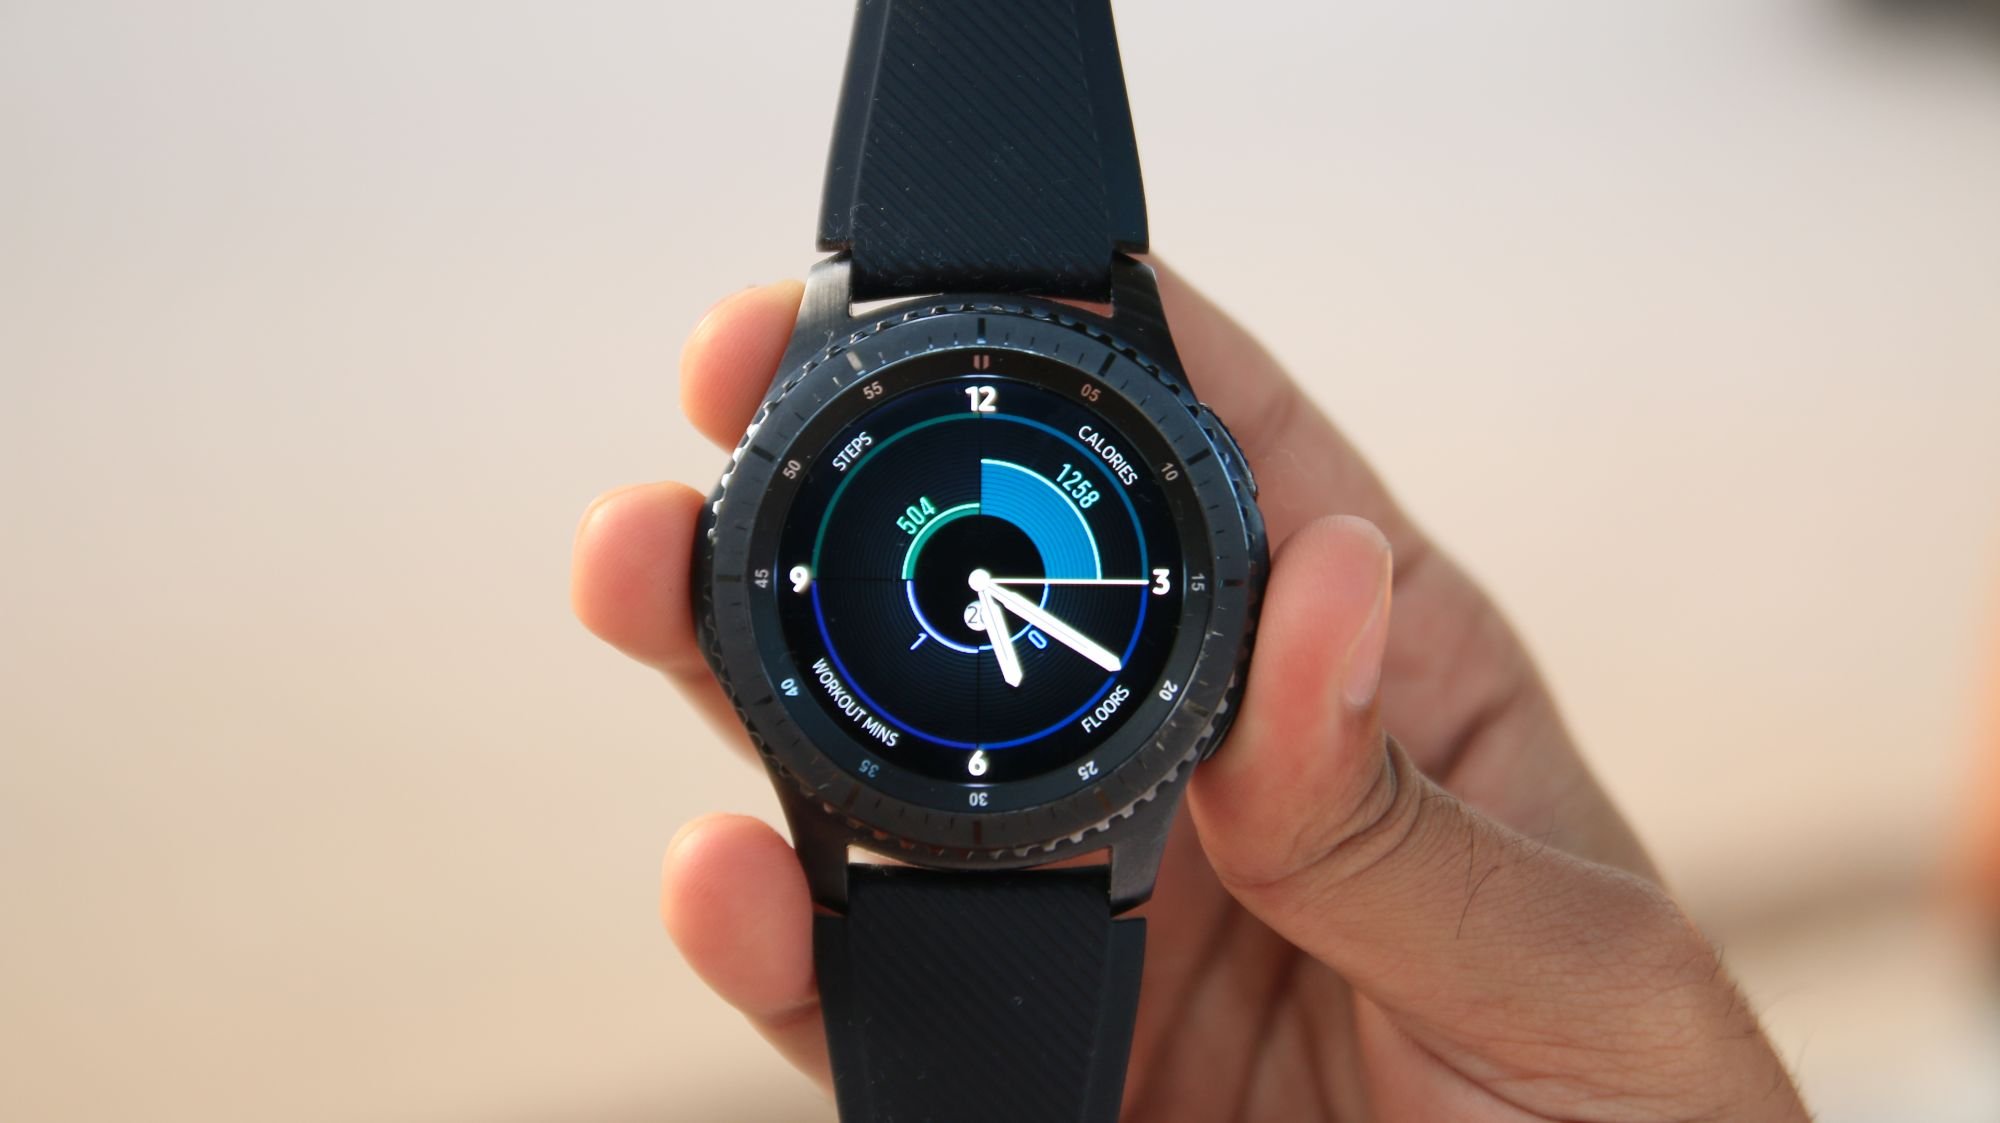 Samsung Gear S3 Frontier review: Outclassing most smartwatches in 